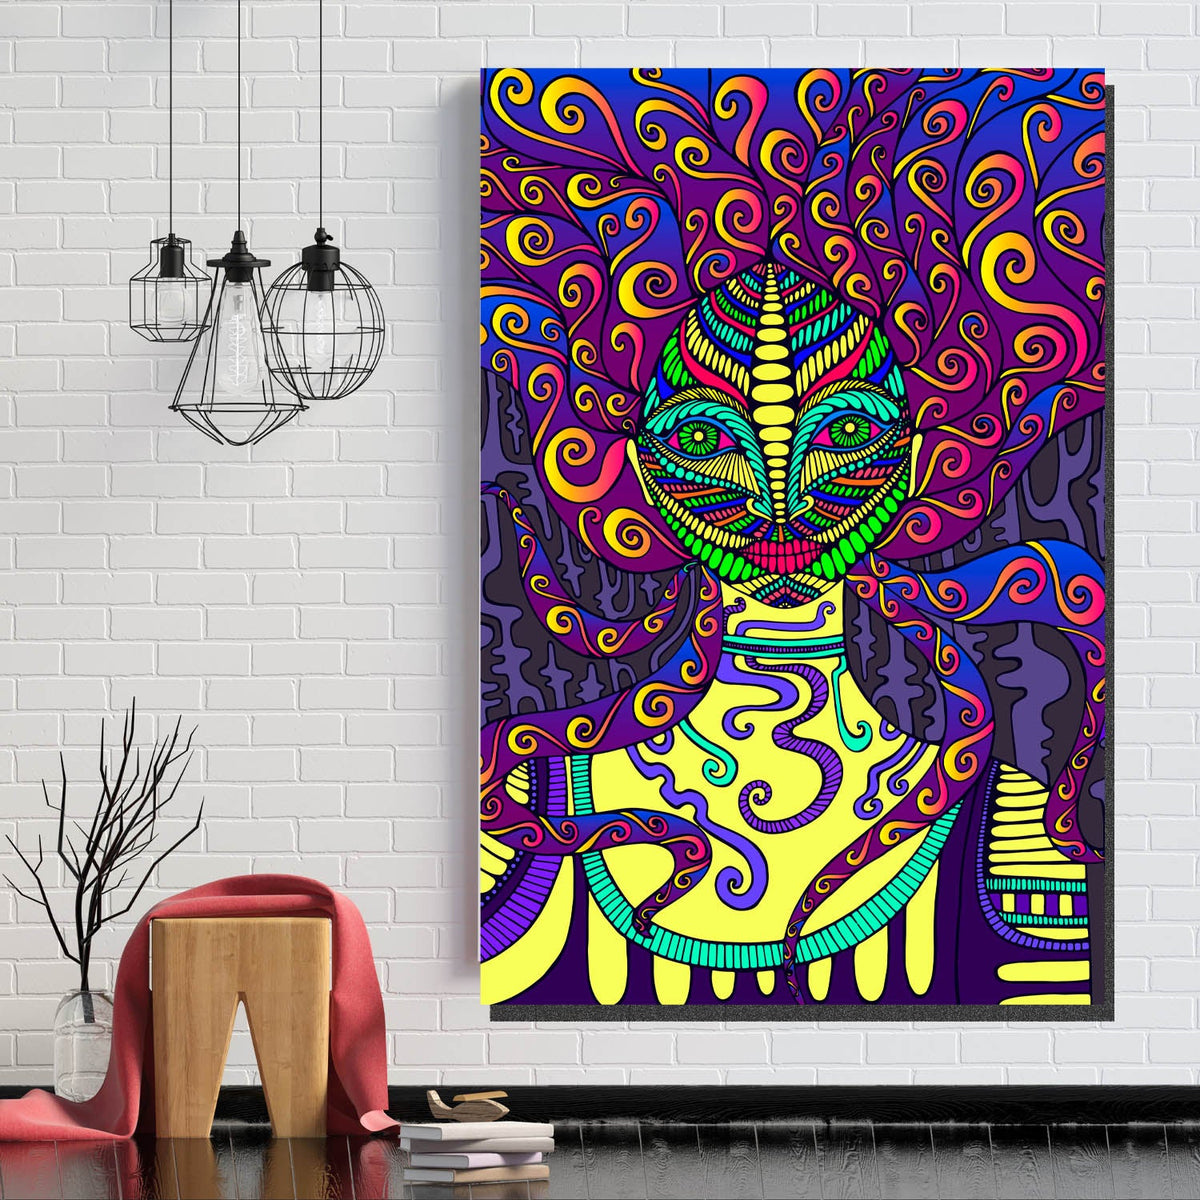 https://cdn.shopify.com/s/files/1/0387/9986/8044/products/PsychedelicWomanCanvasArtprintStretched-1.jpg